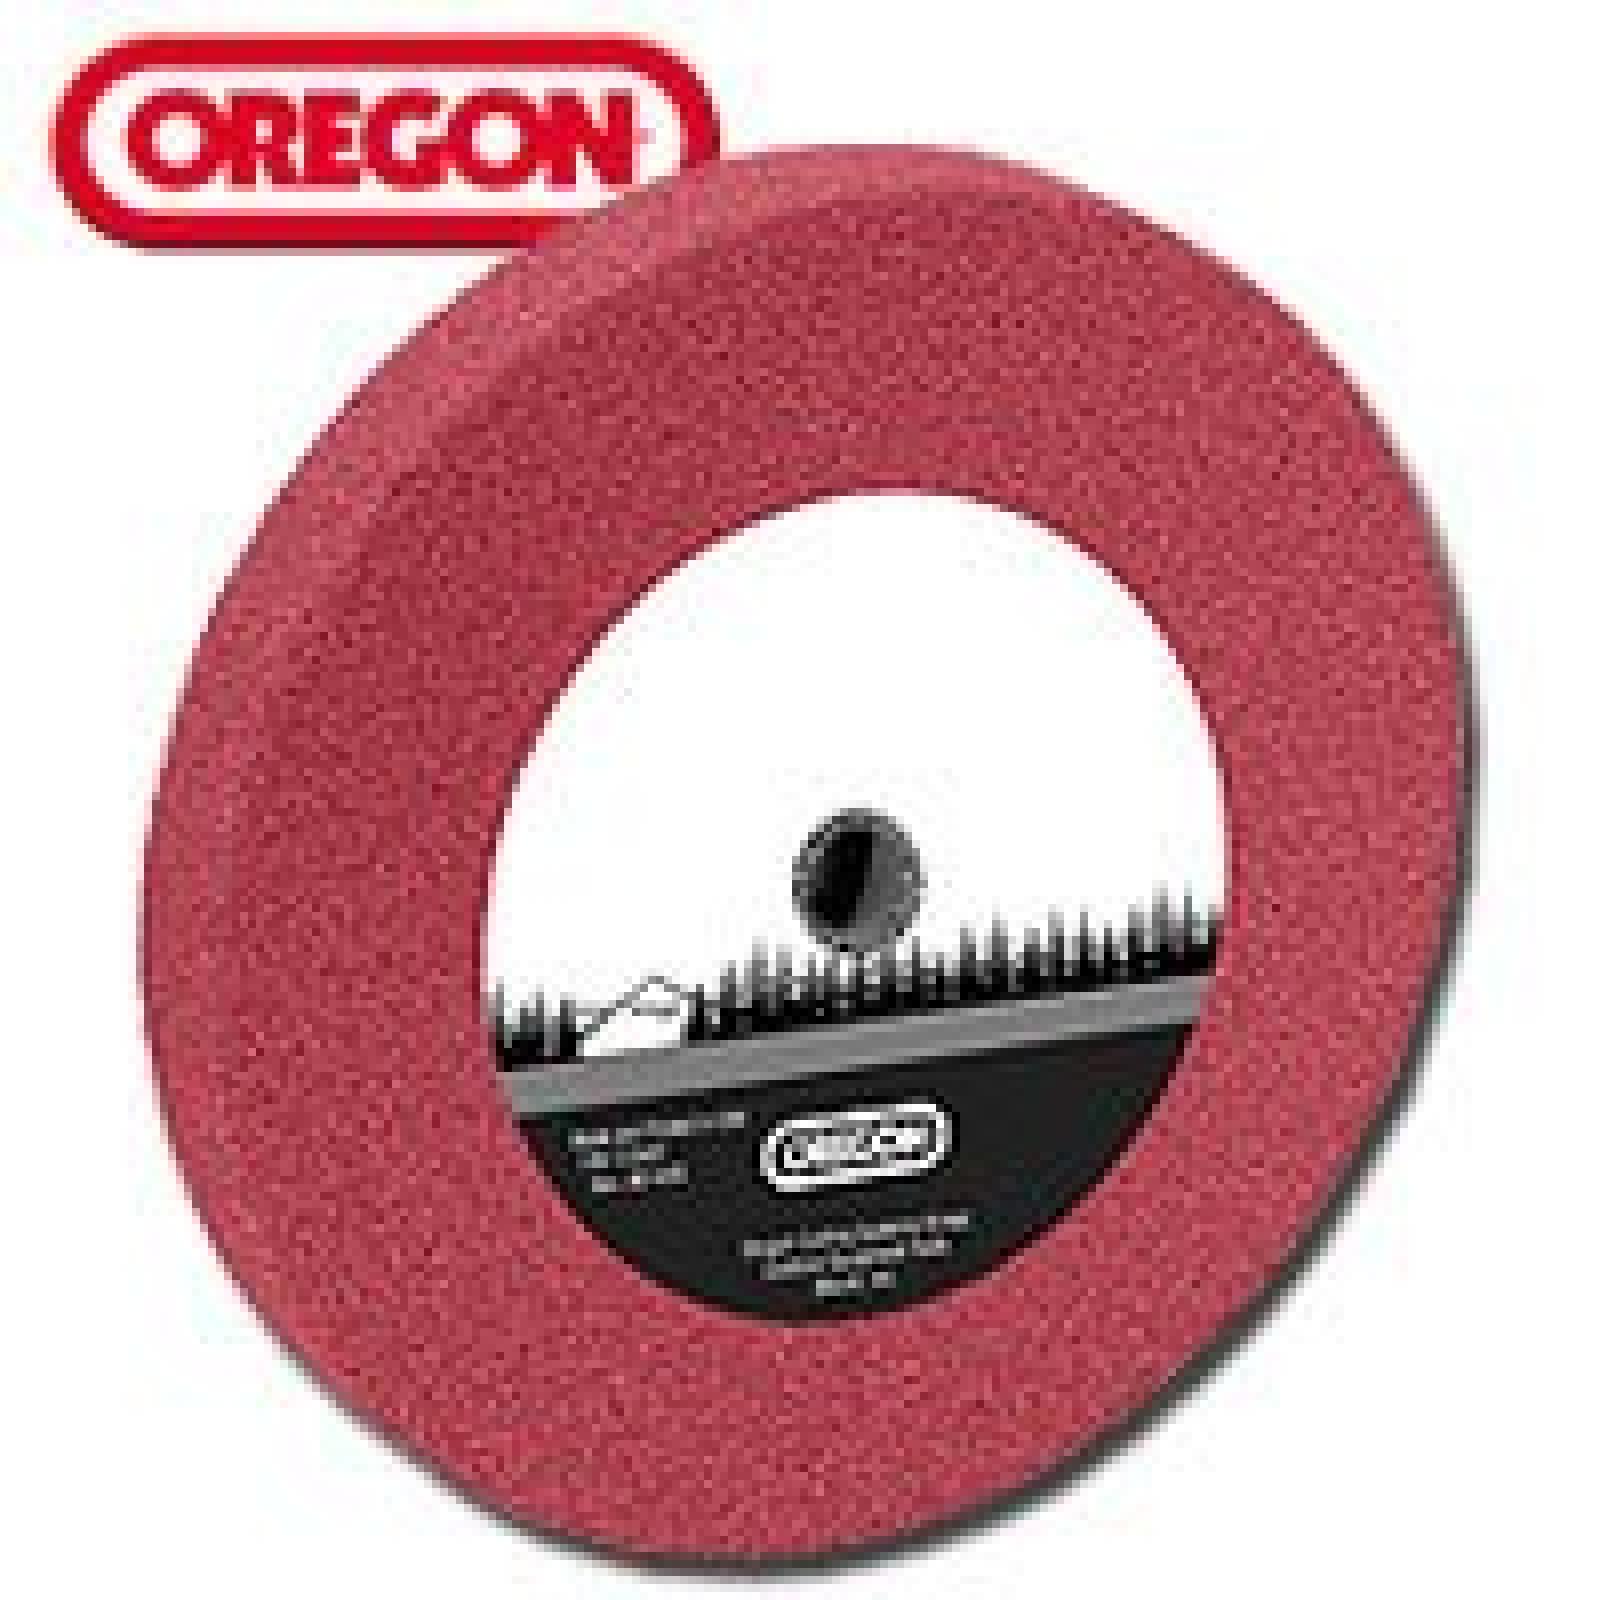 GRINDING STONE 12 INCH 30 part# 88-039 by Oregon - Click Image to Close